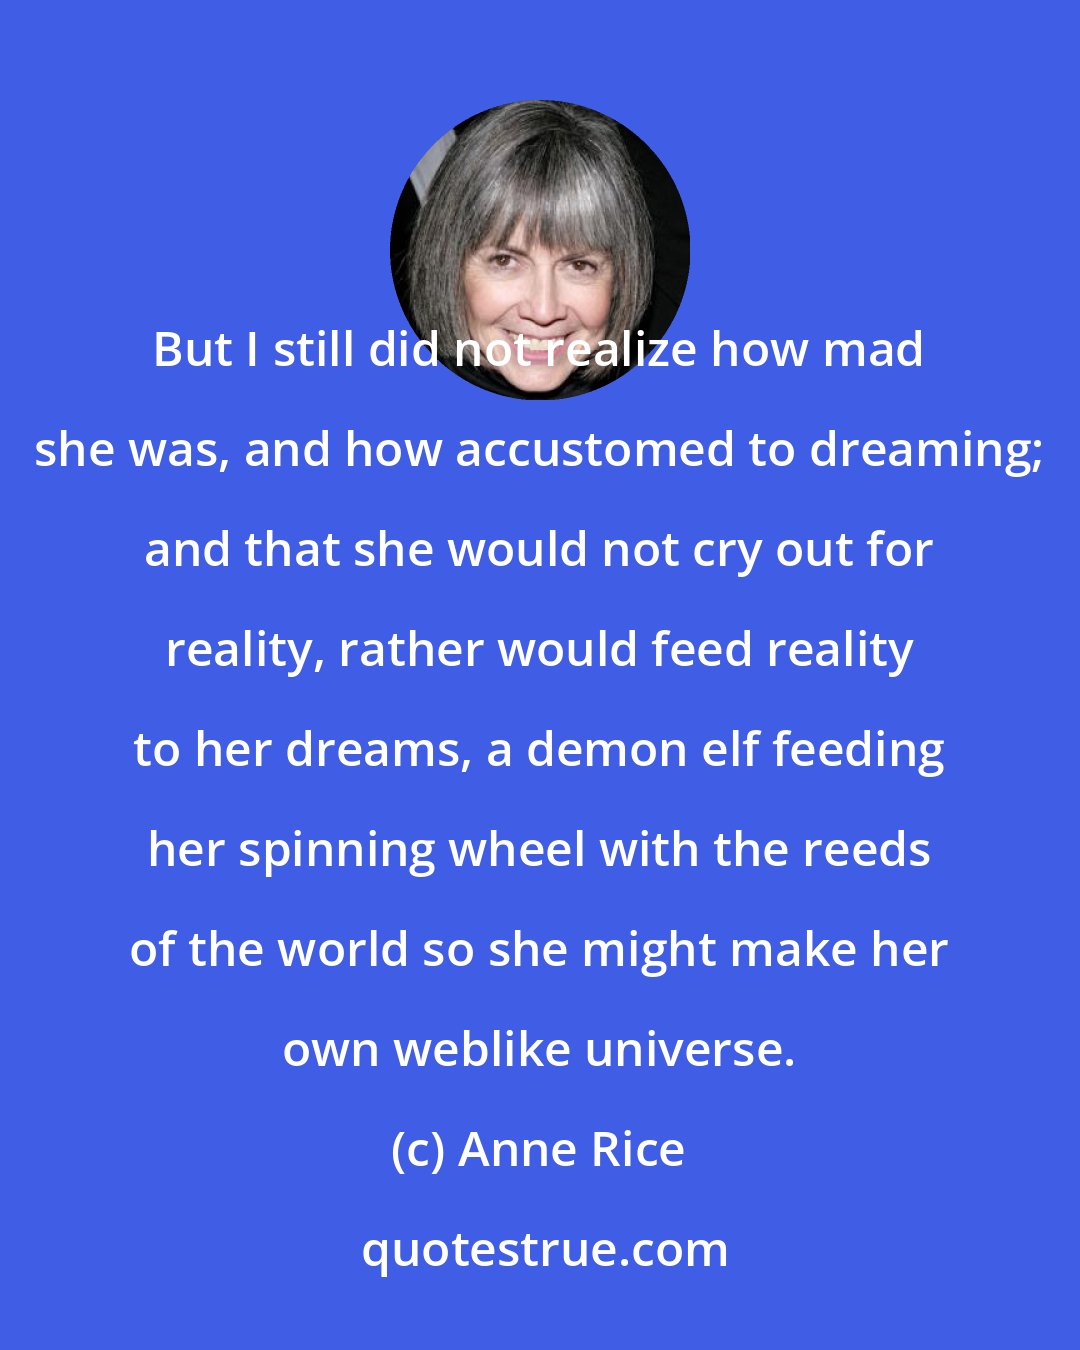 Anne Rice: But I still did not realize how mad she was, and how accustomed to dreaming; and that she would not cry out for reality, rather would feed reality to her dreams, a demon elf feeding her spinning wheel with the reeds of the world so she might make her own weblike universe.